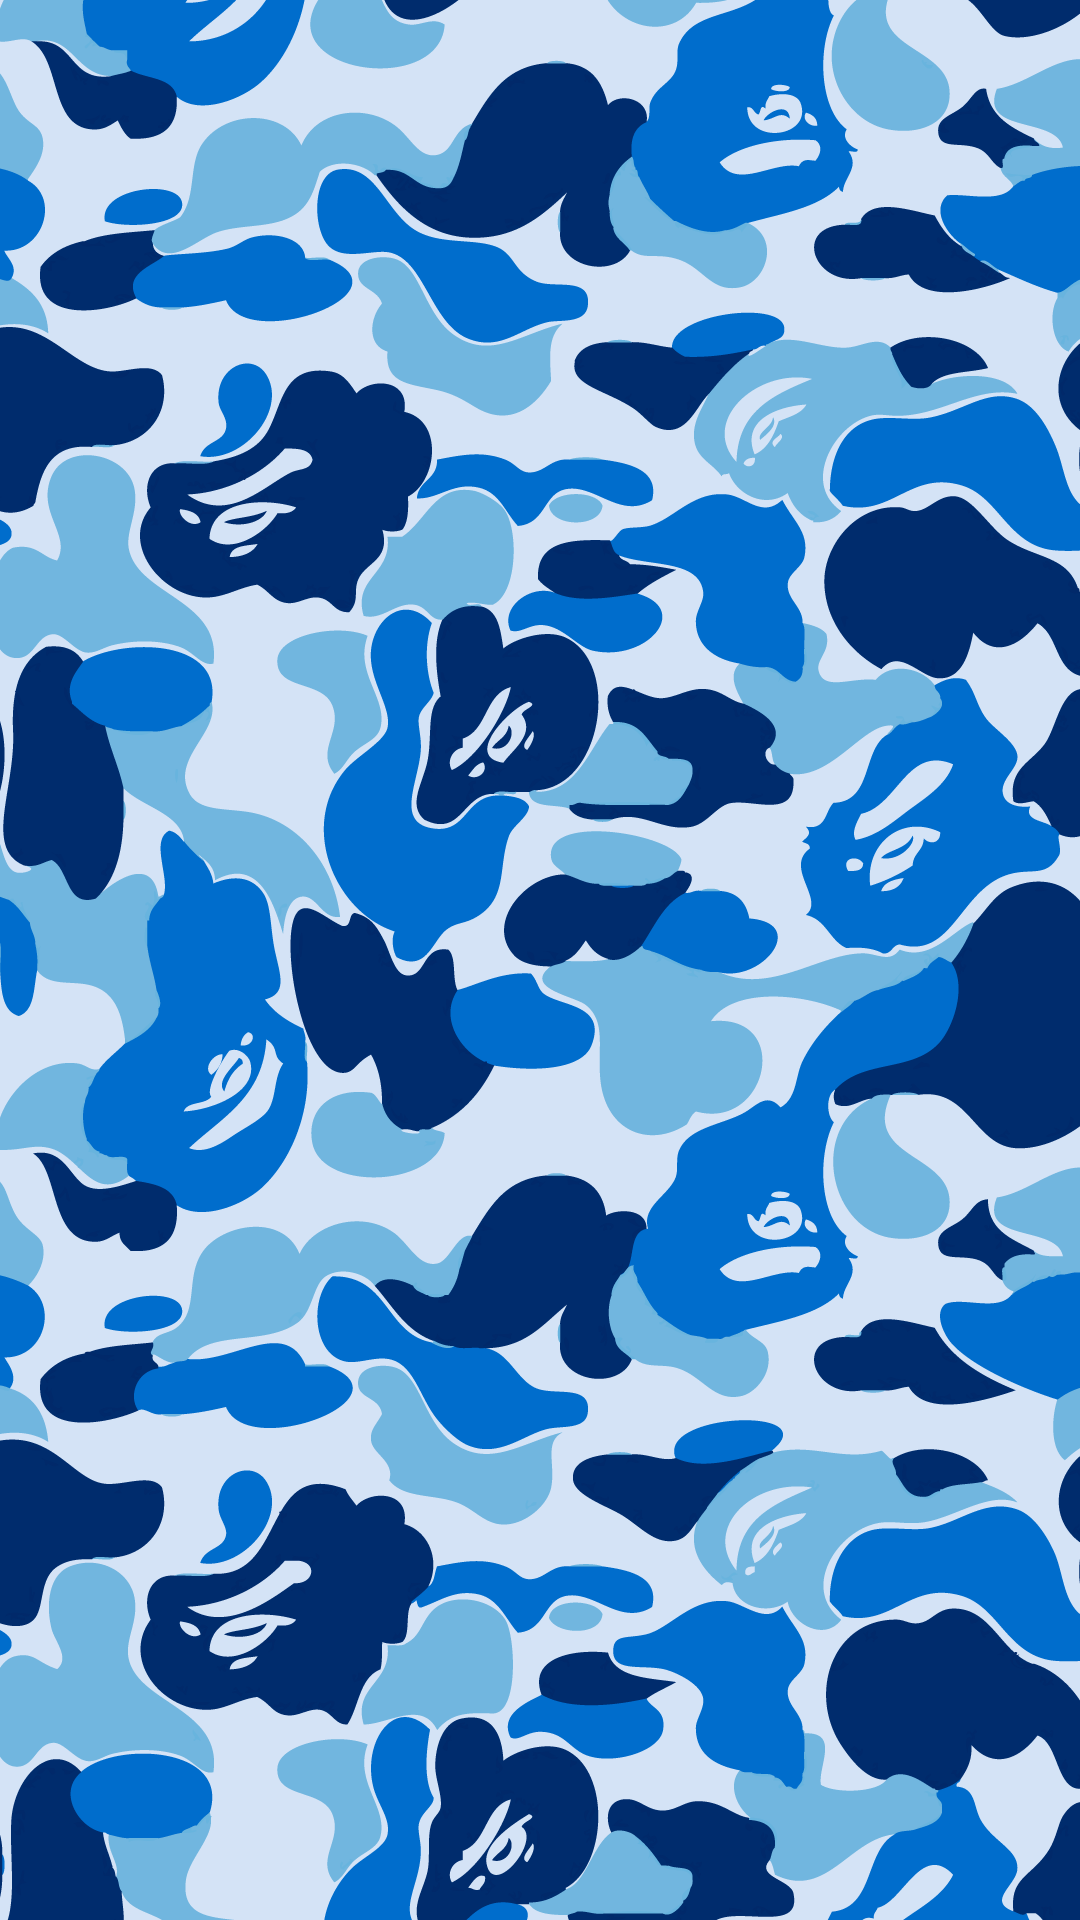 Red Bape Camo Wallpaper Image Pictures Becuo